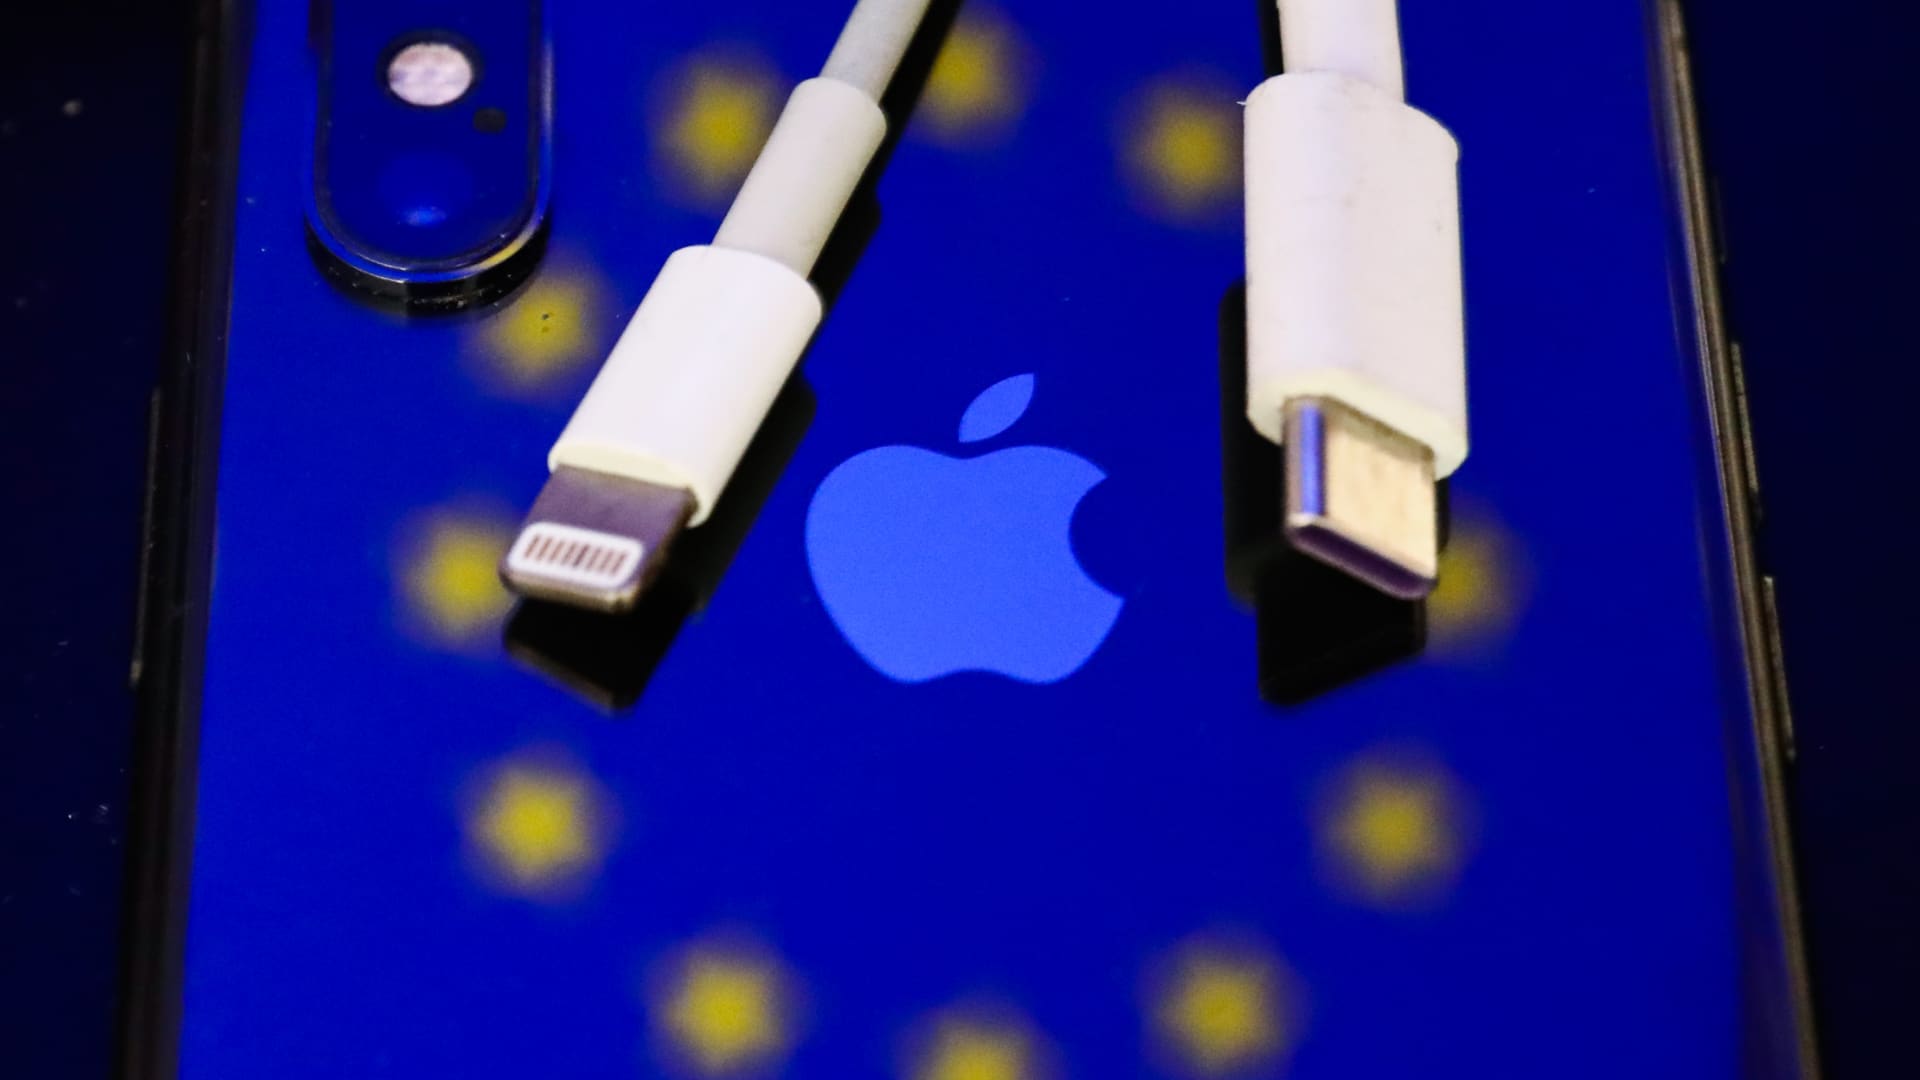 iPhones will get USB-C charging after Apple says it will have to comply with EU law